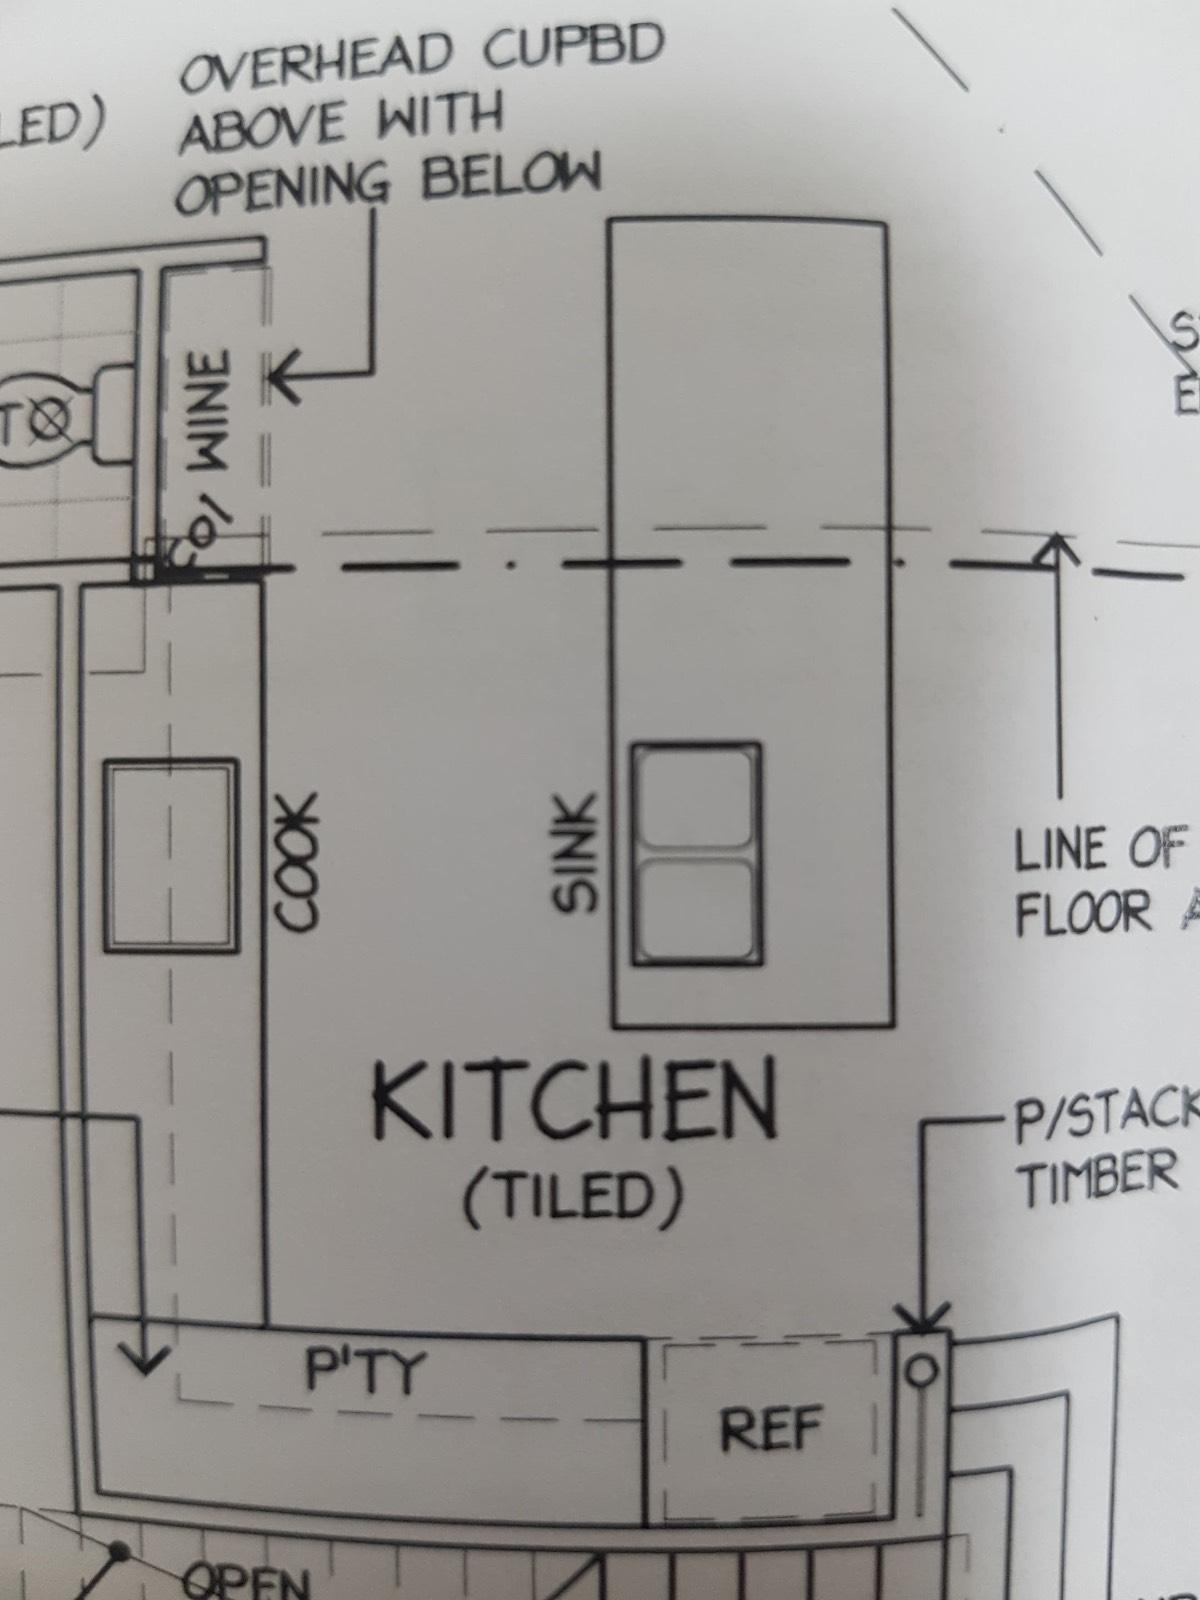 Help! How would you structure the utilities in THIS kitchen?